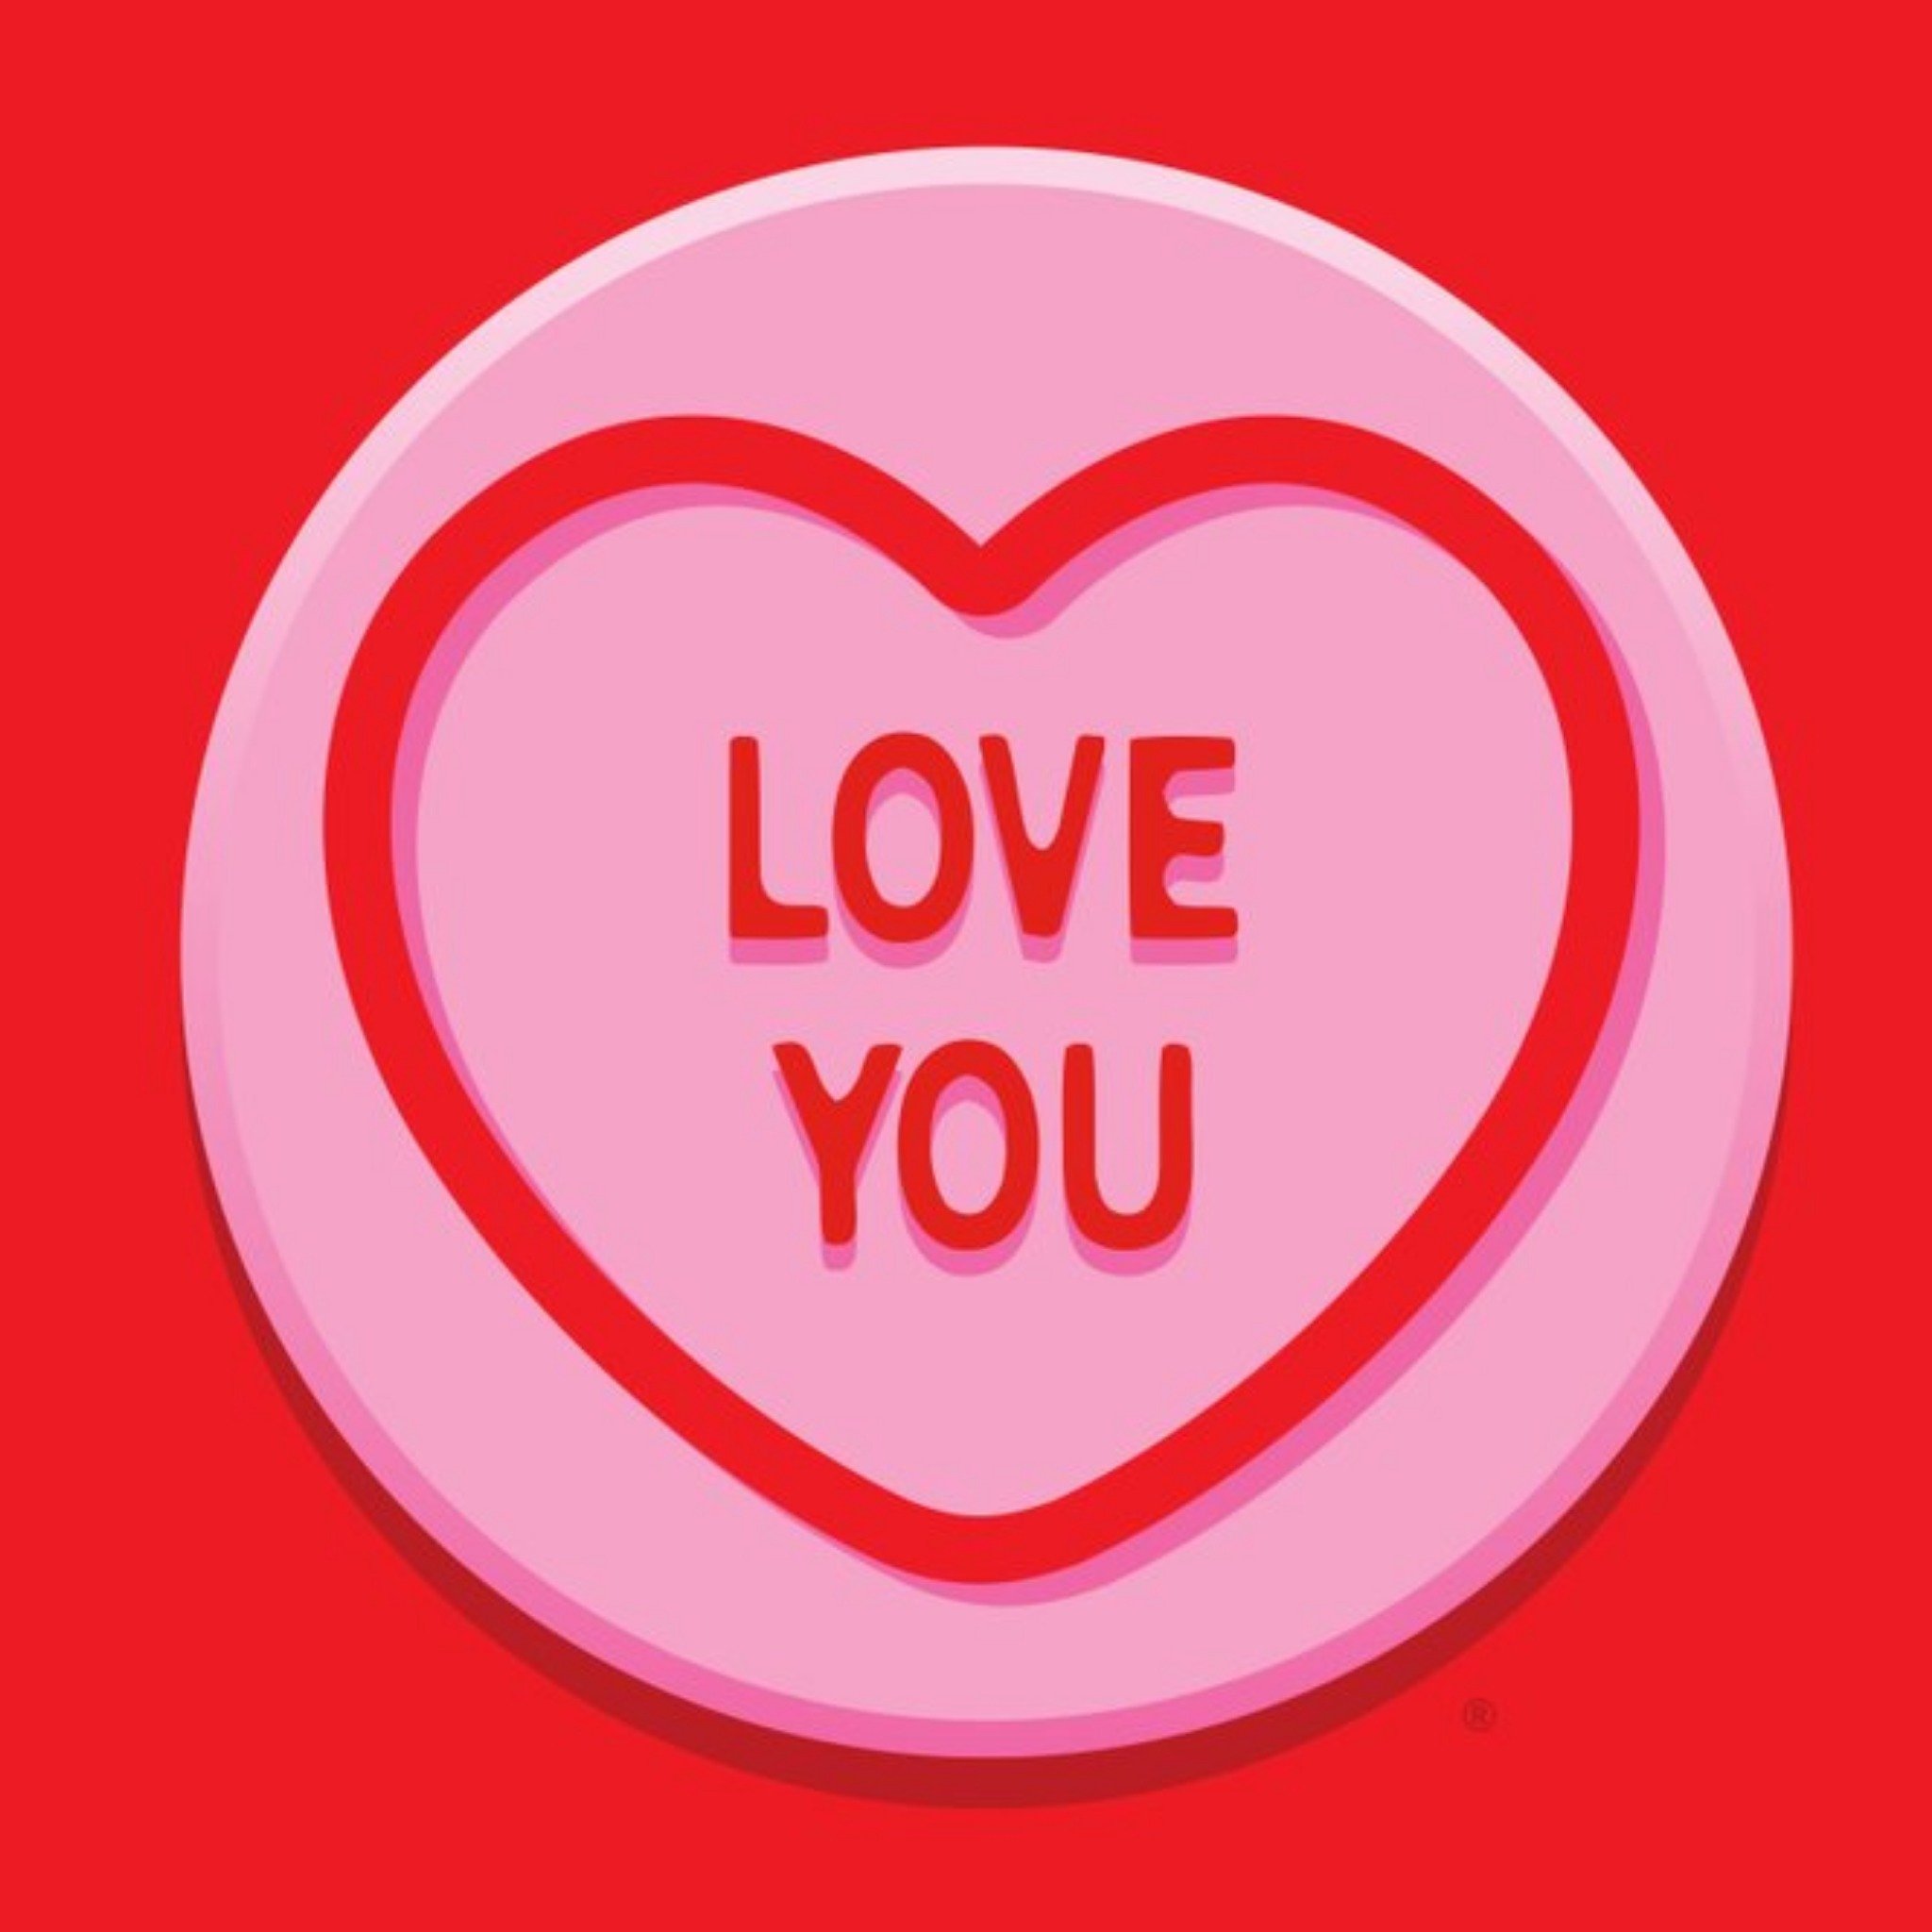 Love Hearts Swizzels Pink Love Heart Love You Valentine's Day Card, Square